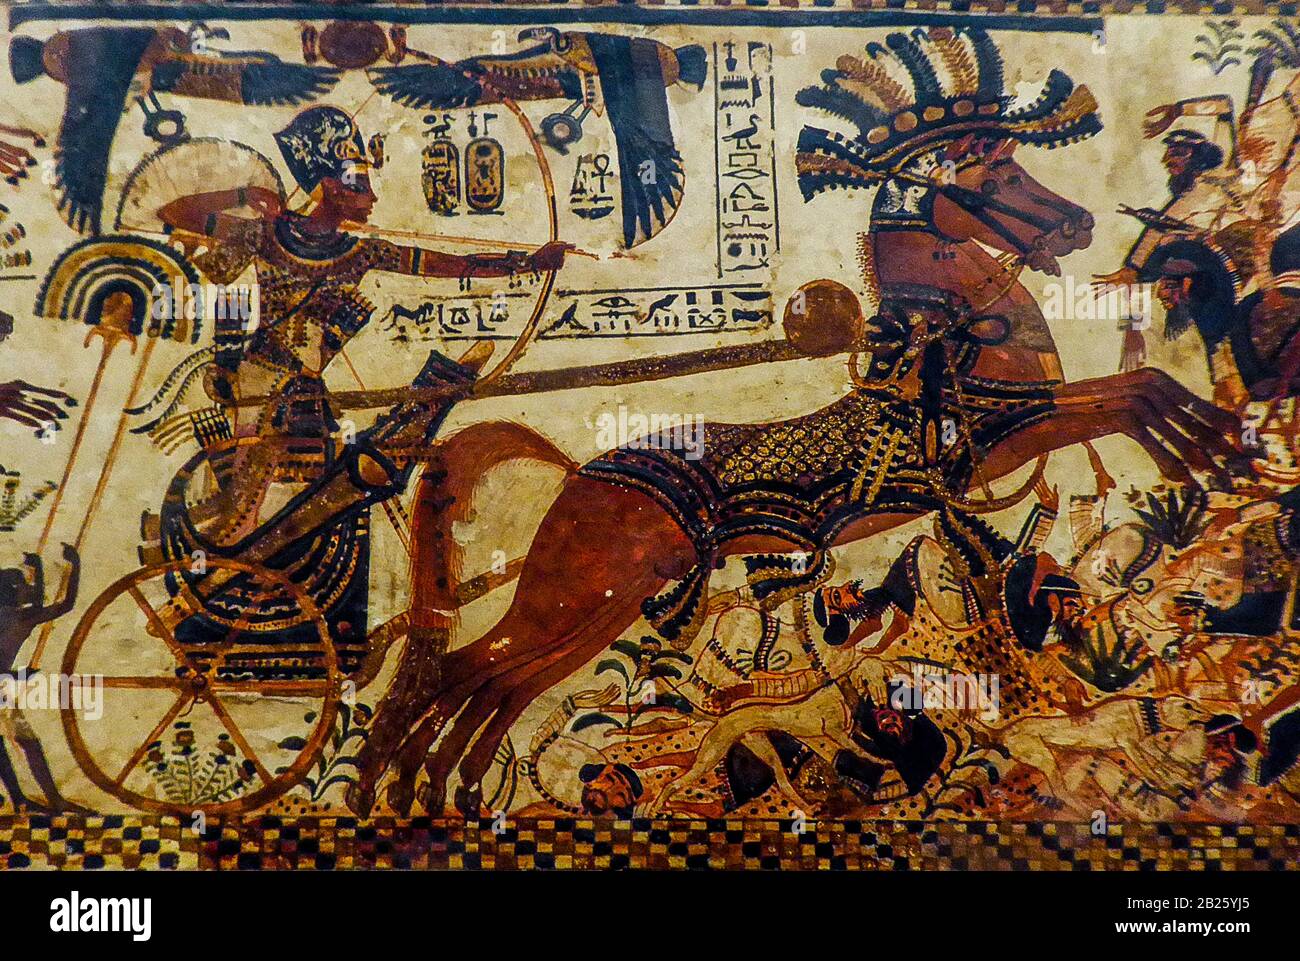 Egypt Cairo Archeological Museum Tutankhamun - Tutankhamun's War Chariot  Tutankhamun's painted chest features scenes of the king battling Egypts enemies, on the long sides he is shown as a warrior in his chariot attacking Libyans, Hittites and Nubians Stock Photo